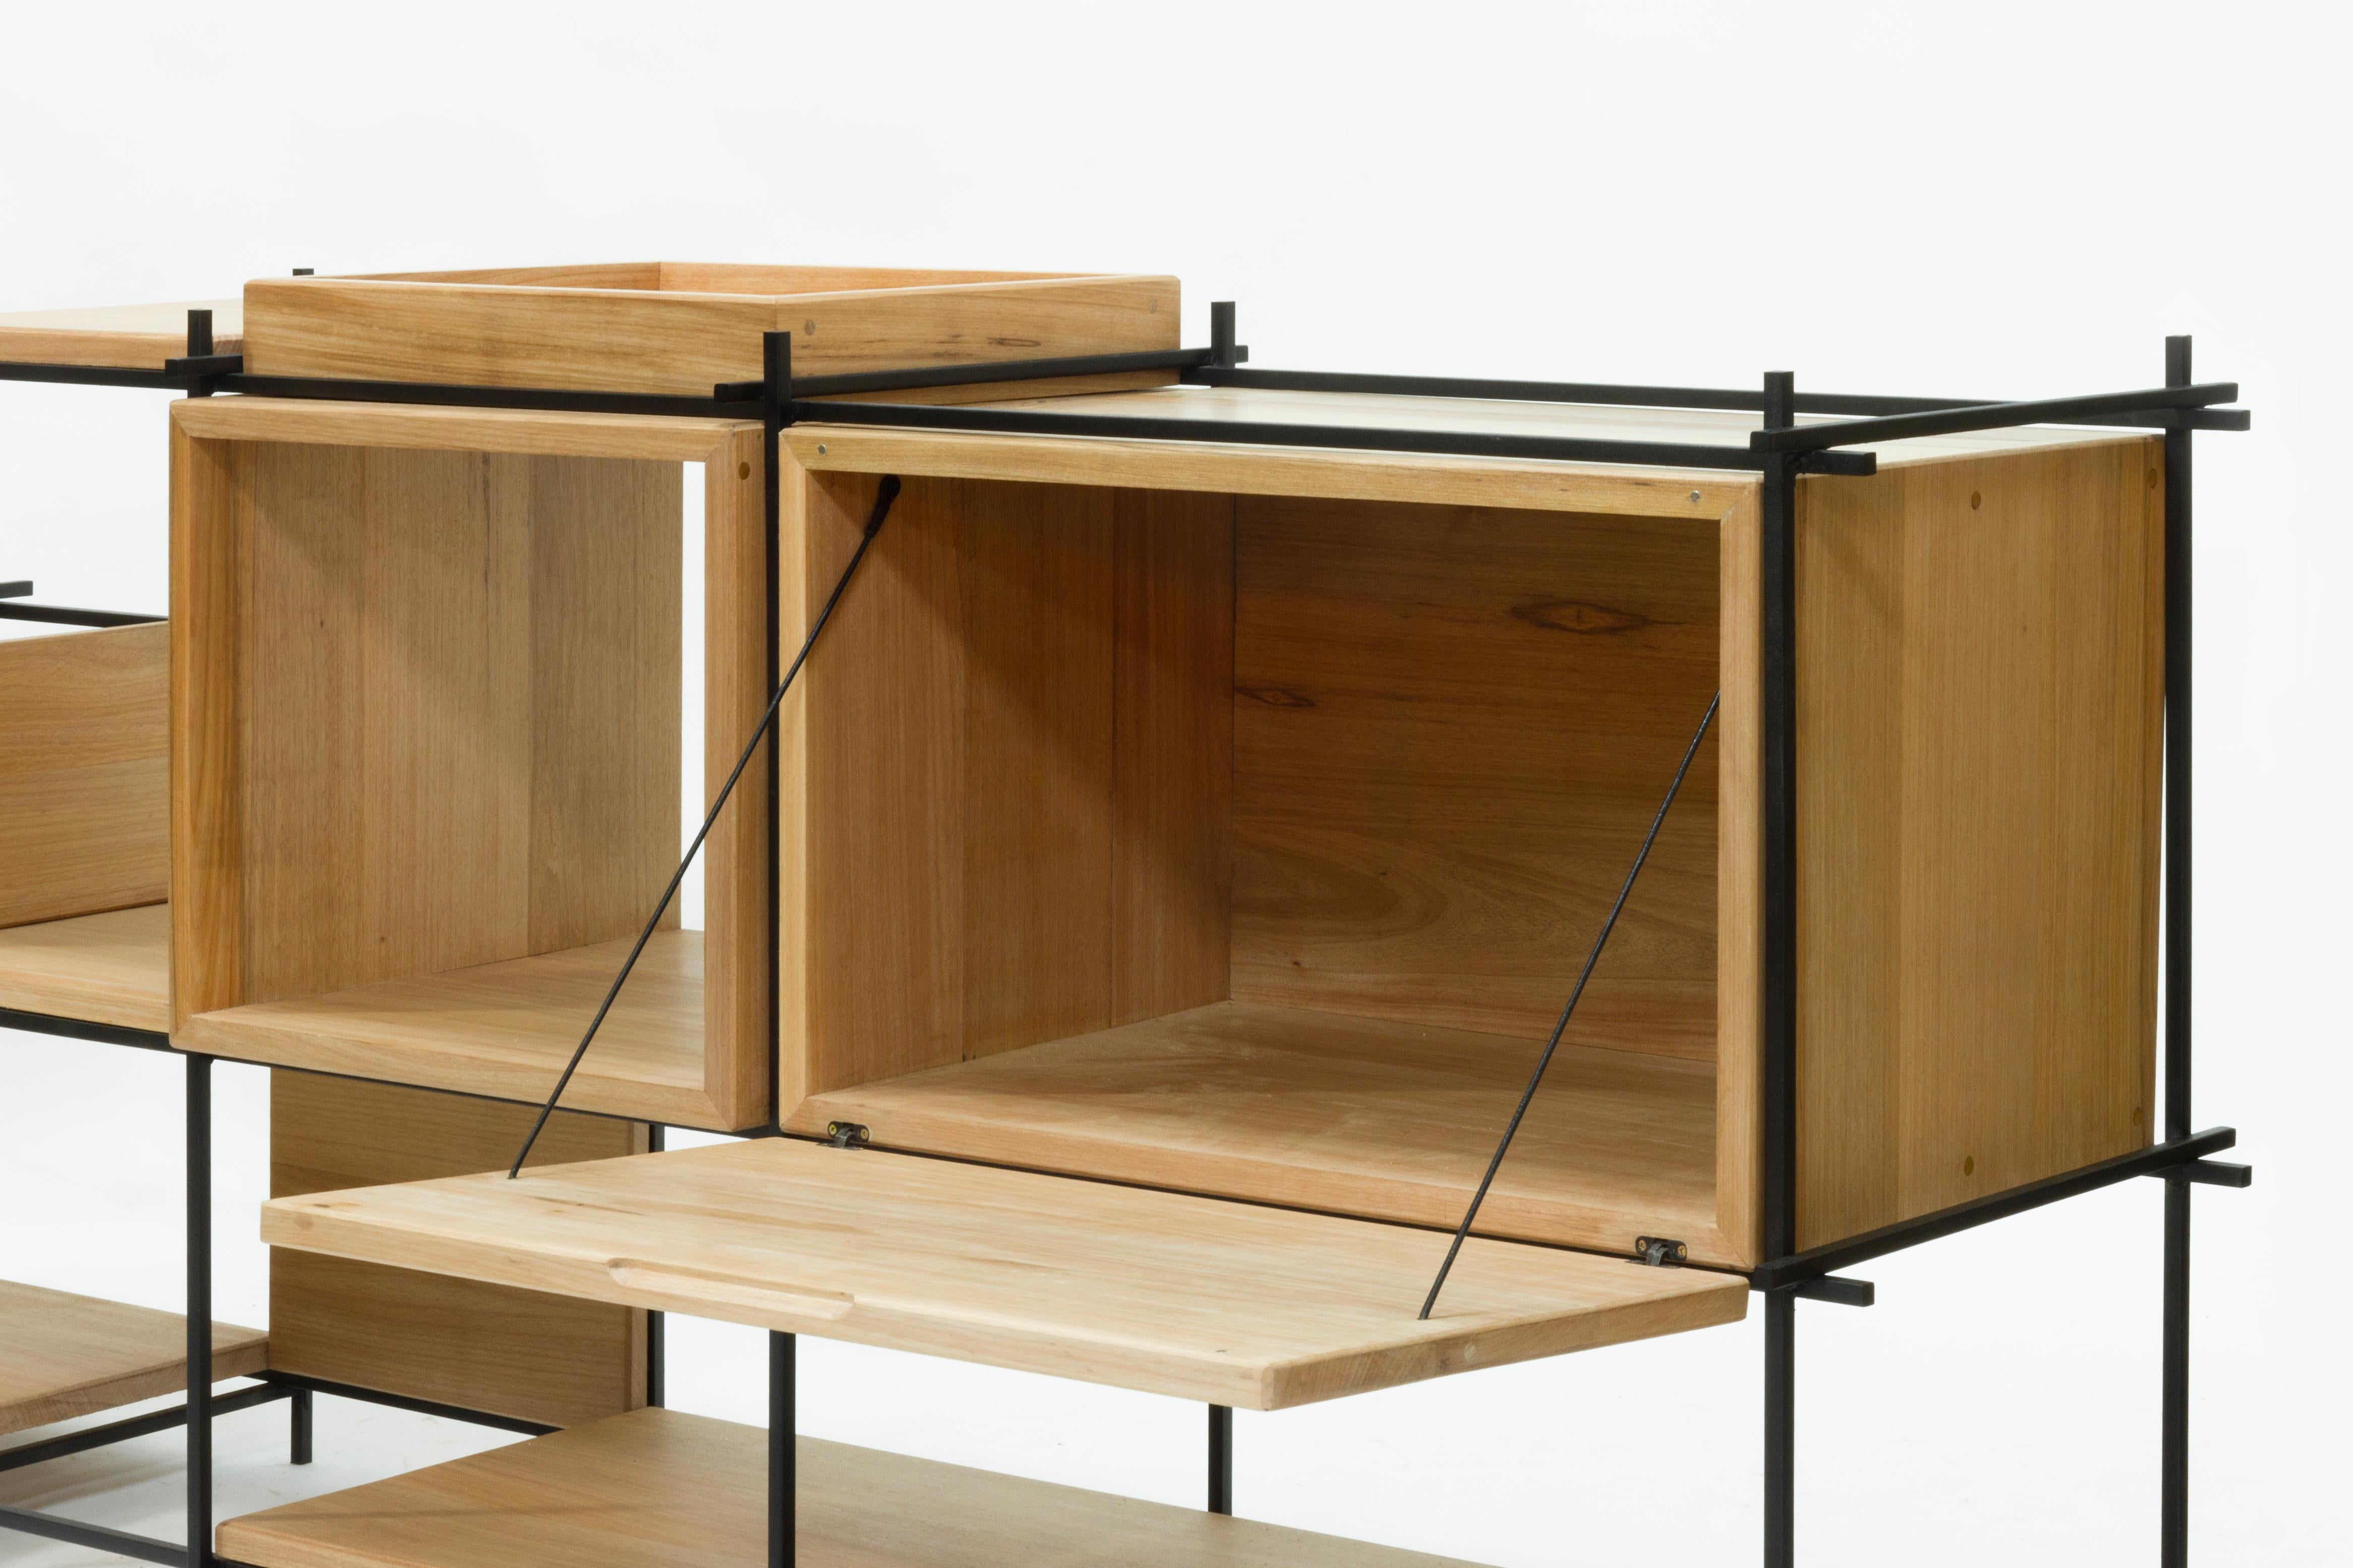 Sideboard in Hardwood and Steel, Brazilian Contemporary Design by O Formigueiro For Sale 1